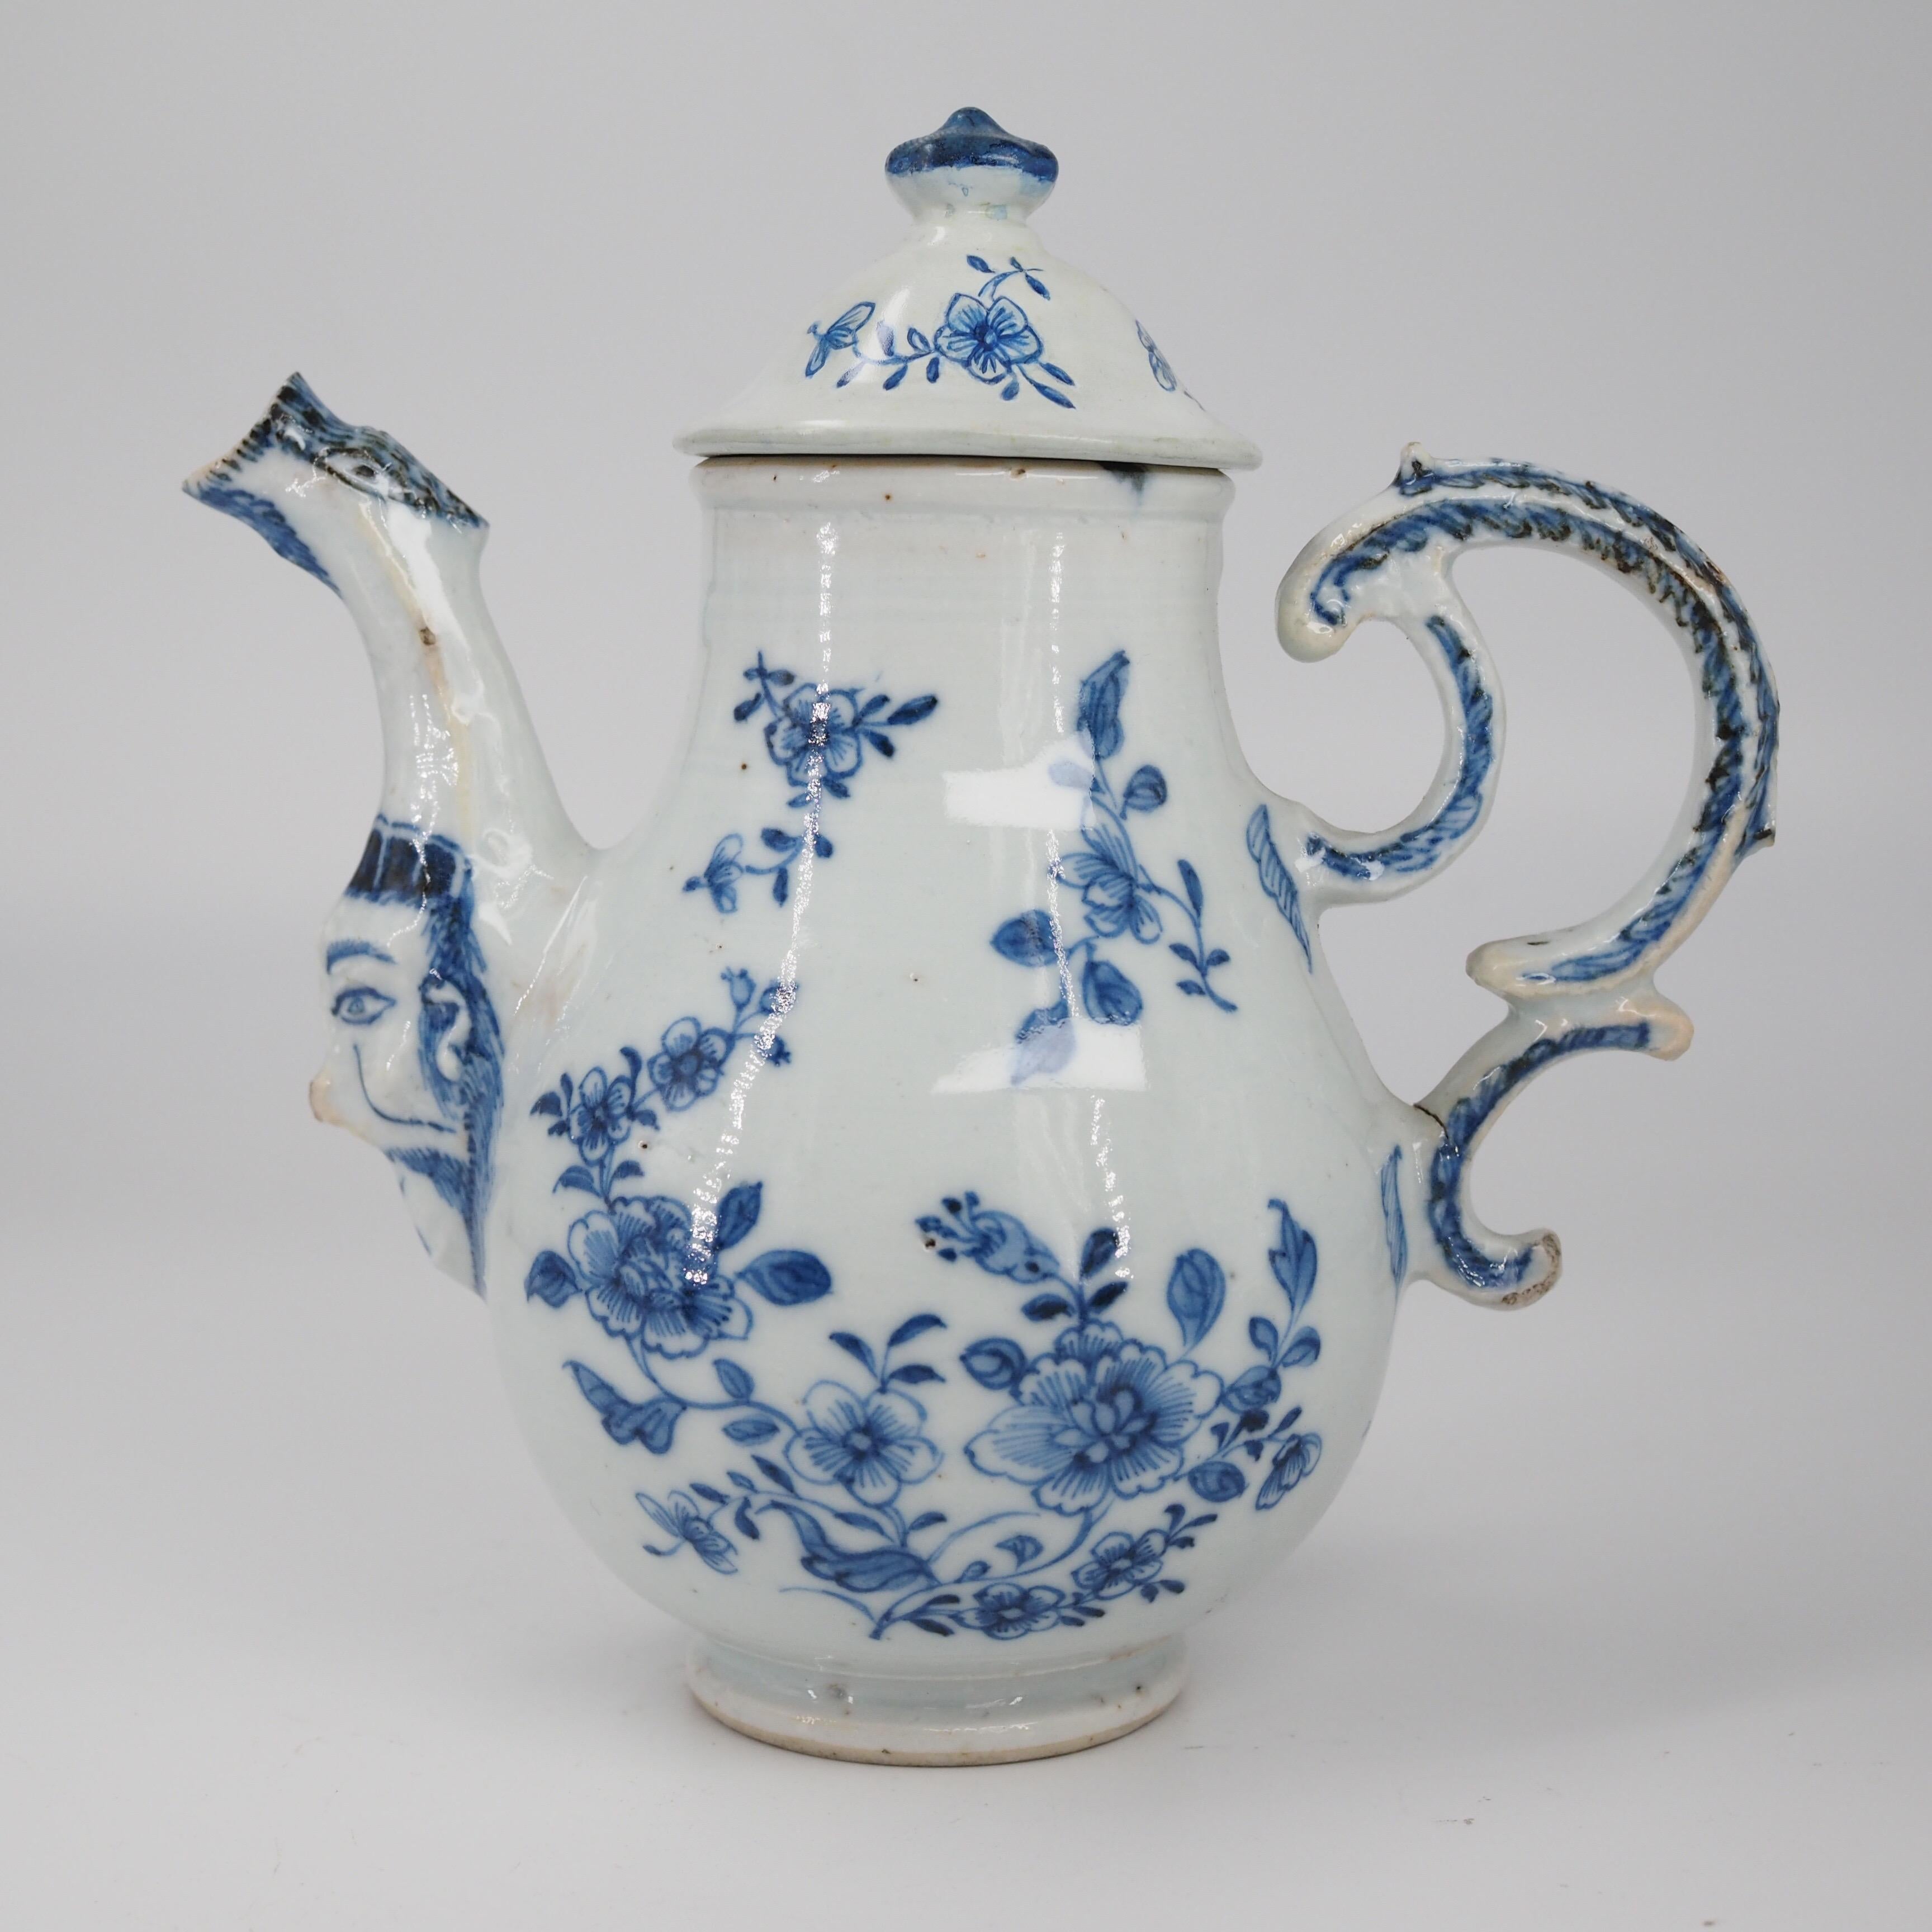 Rare Chinese export ewer, copied from a Meissen original of circa 1740, the baluster shaped body on short base, with c-scroll handle and birds-head moulded spout, a face moulded at the join with the body, painted in underglaze blue with scattered